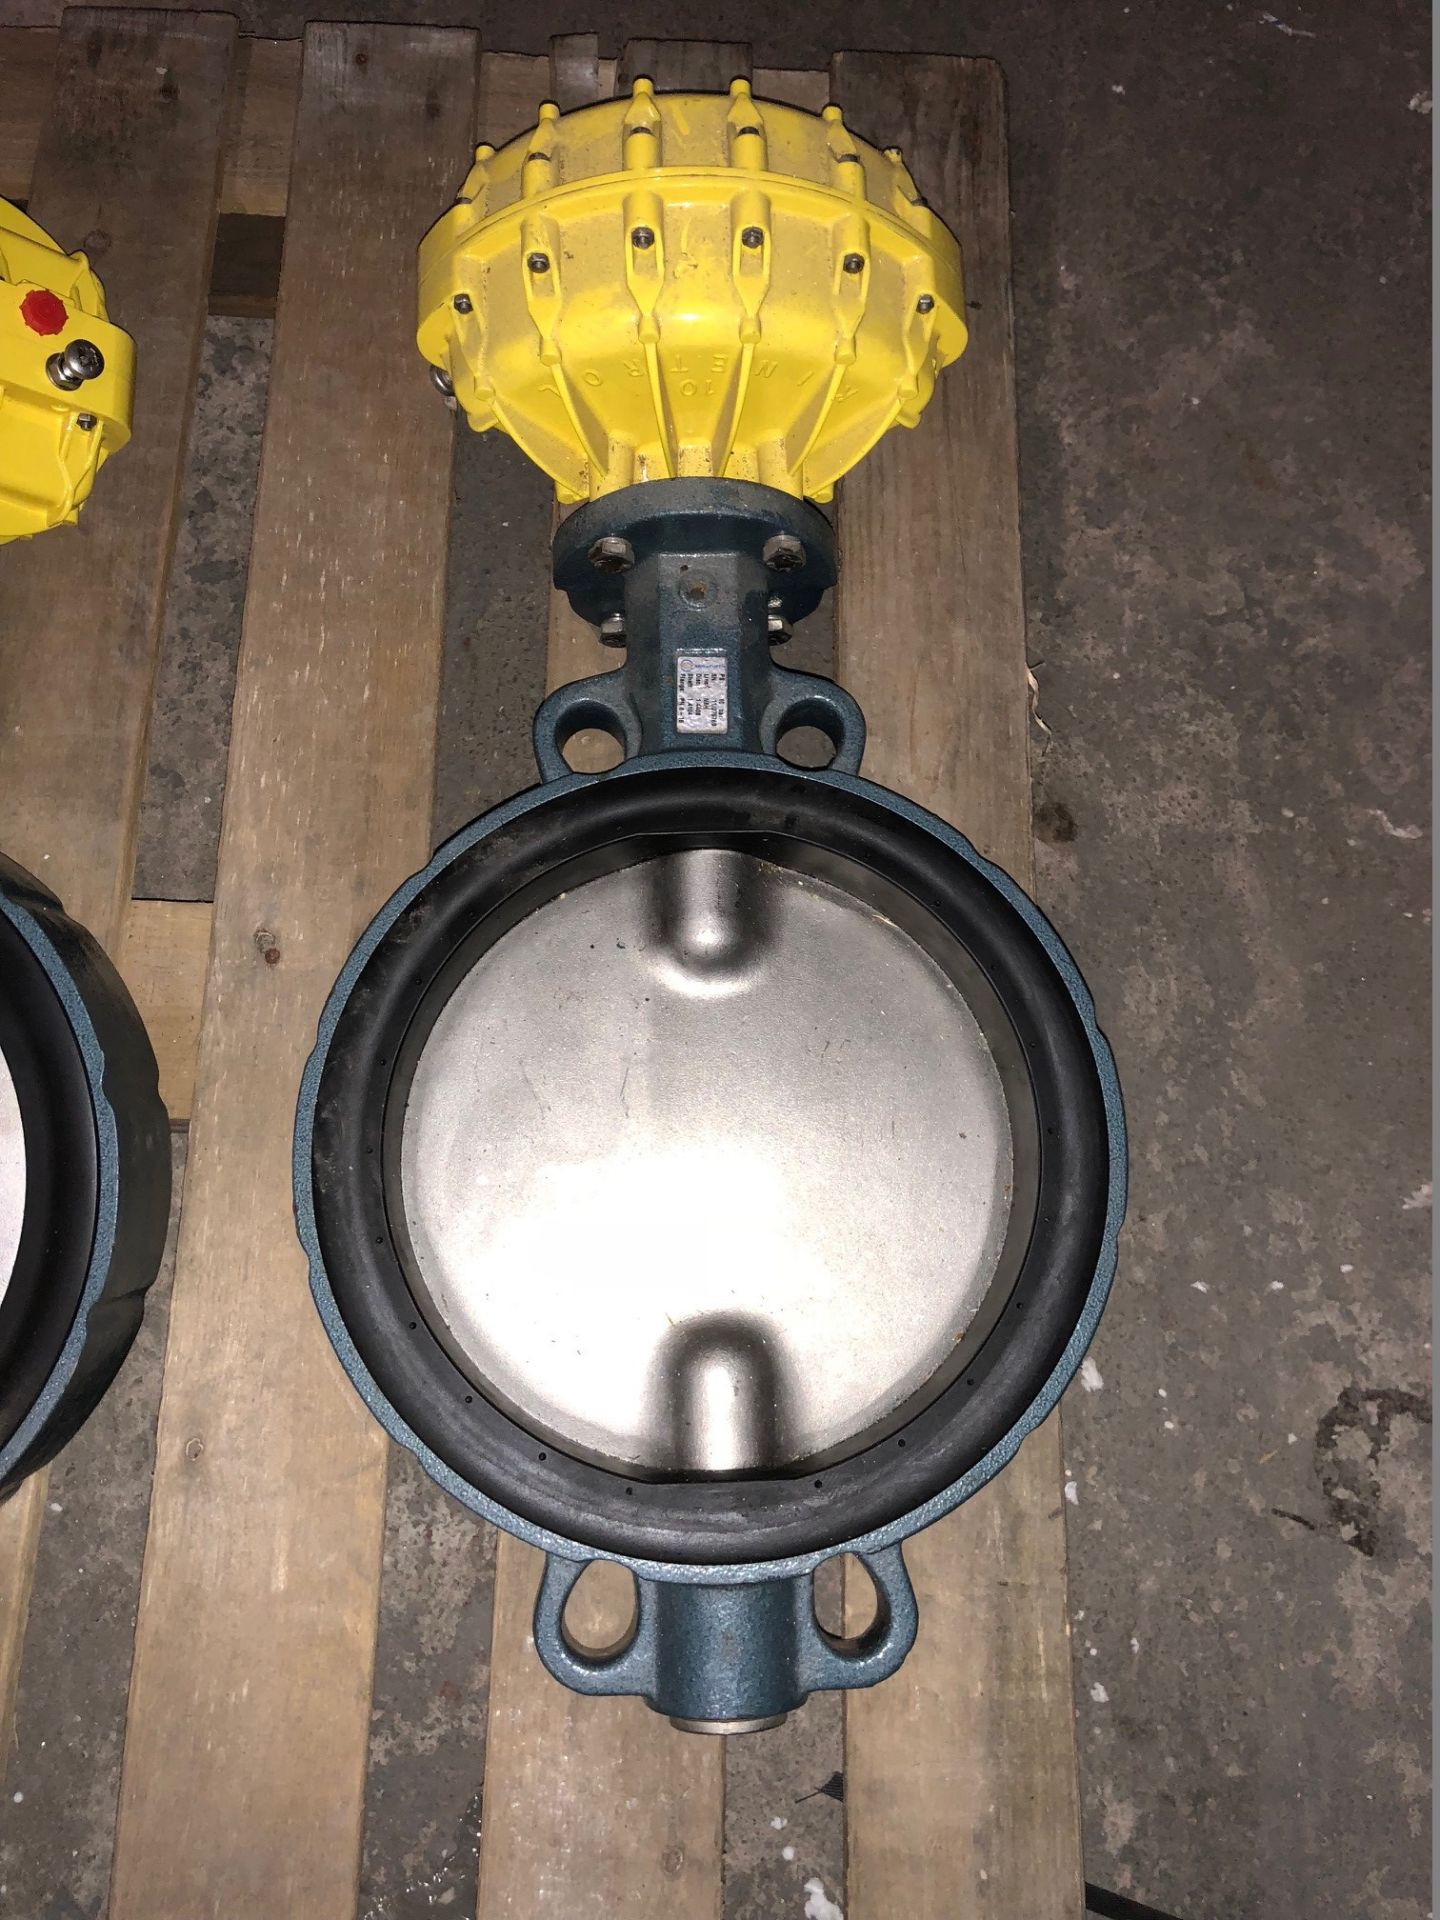 10" Cast Iron Butterfly Valve With a Kinetrol Model 10 Actuator Attached - Image 2 of 3